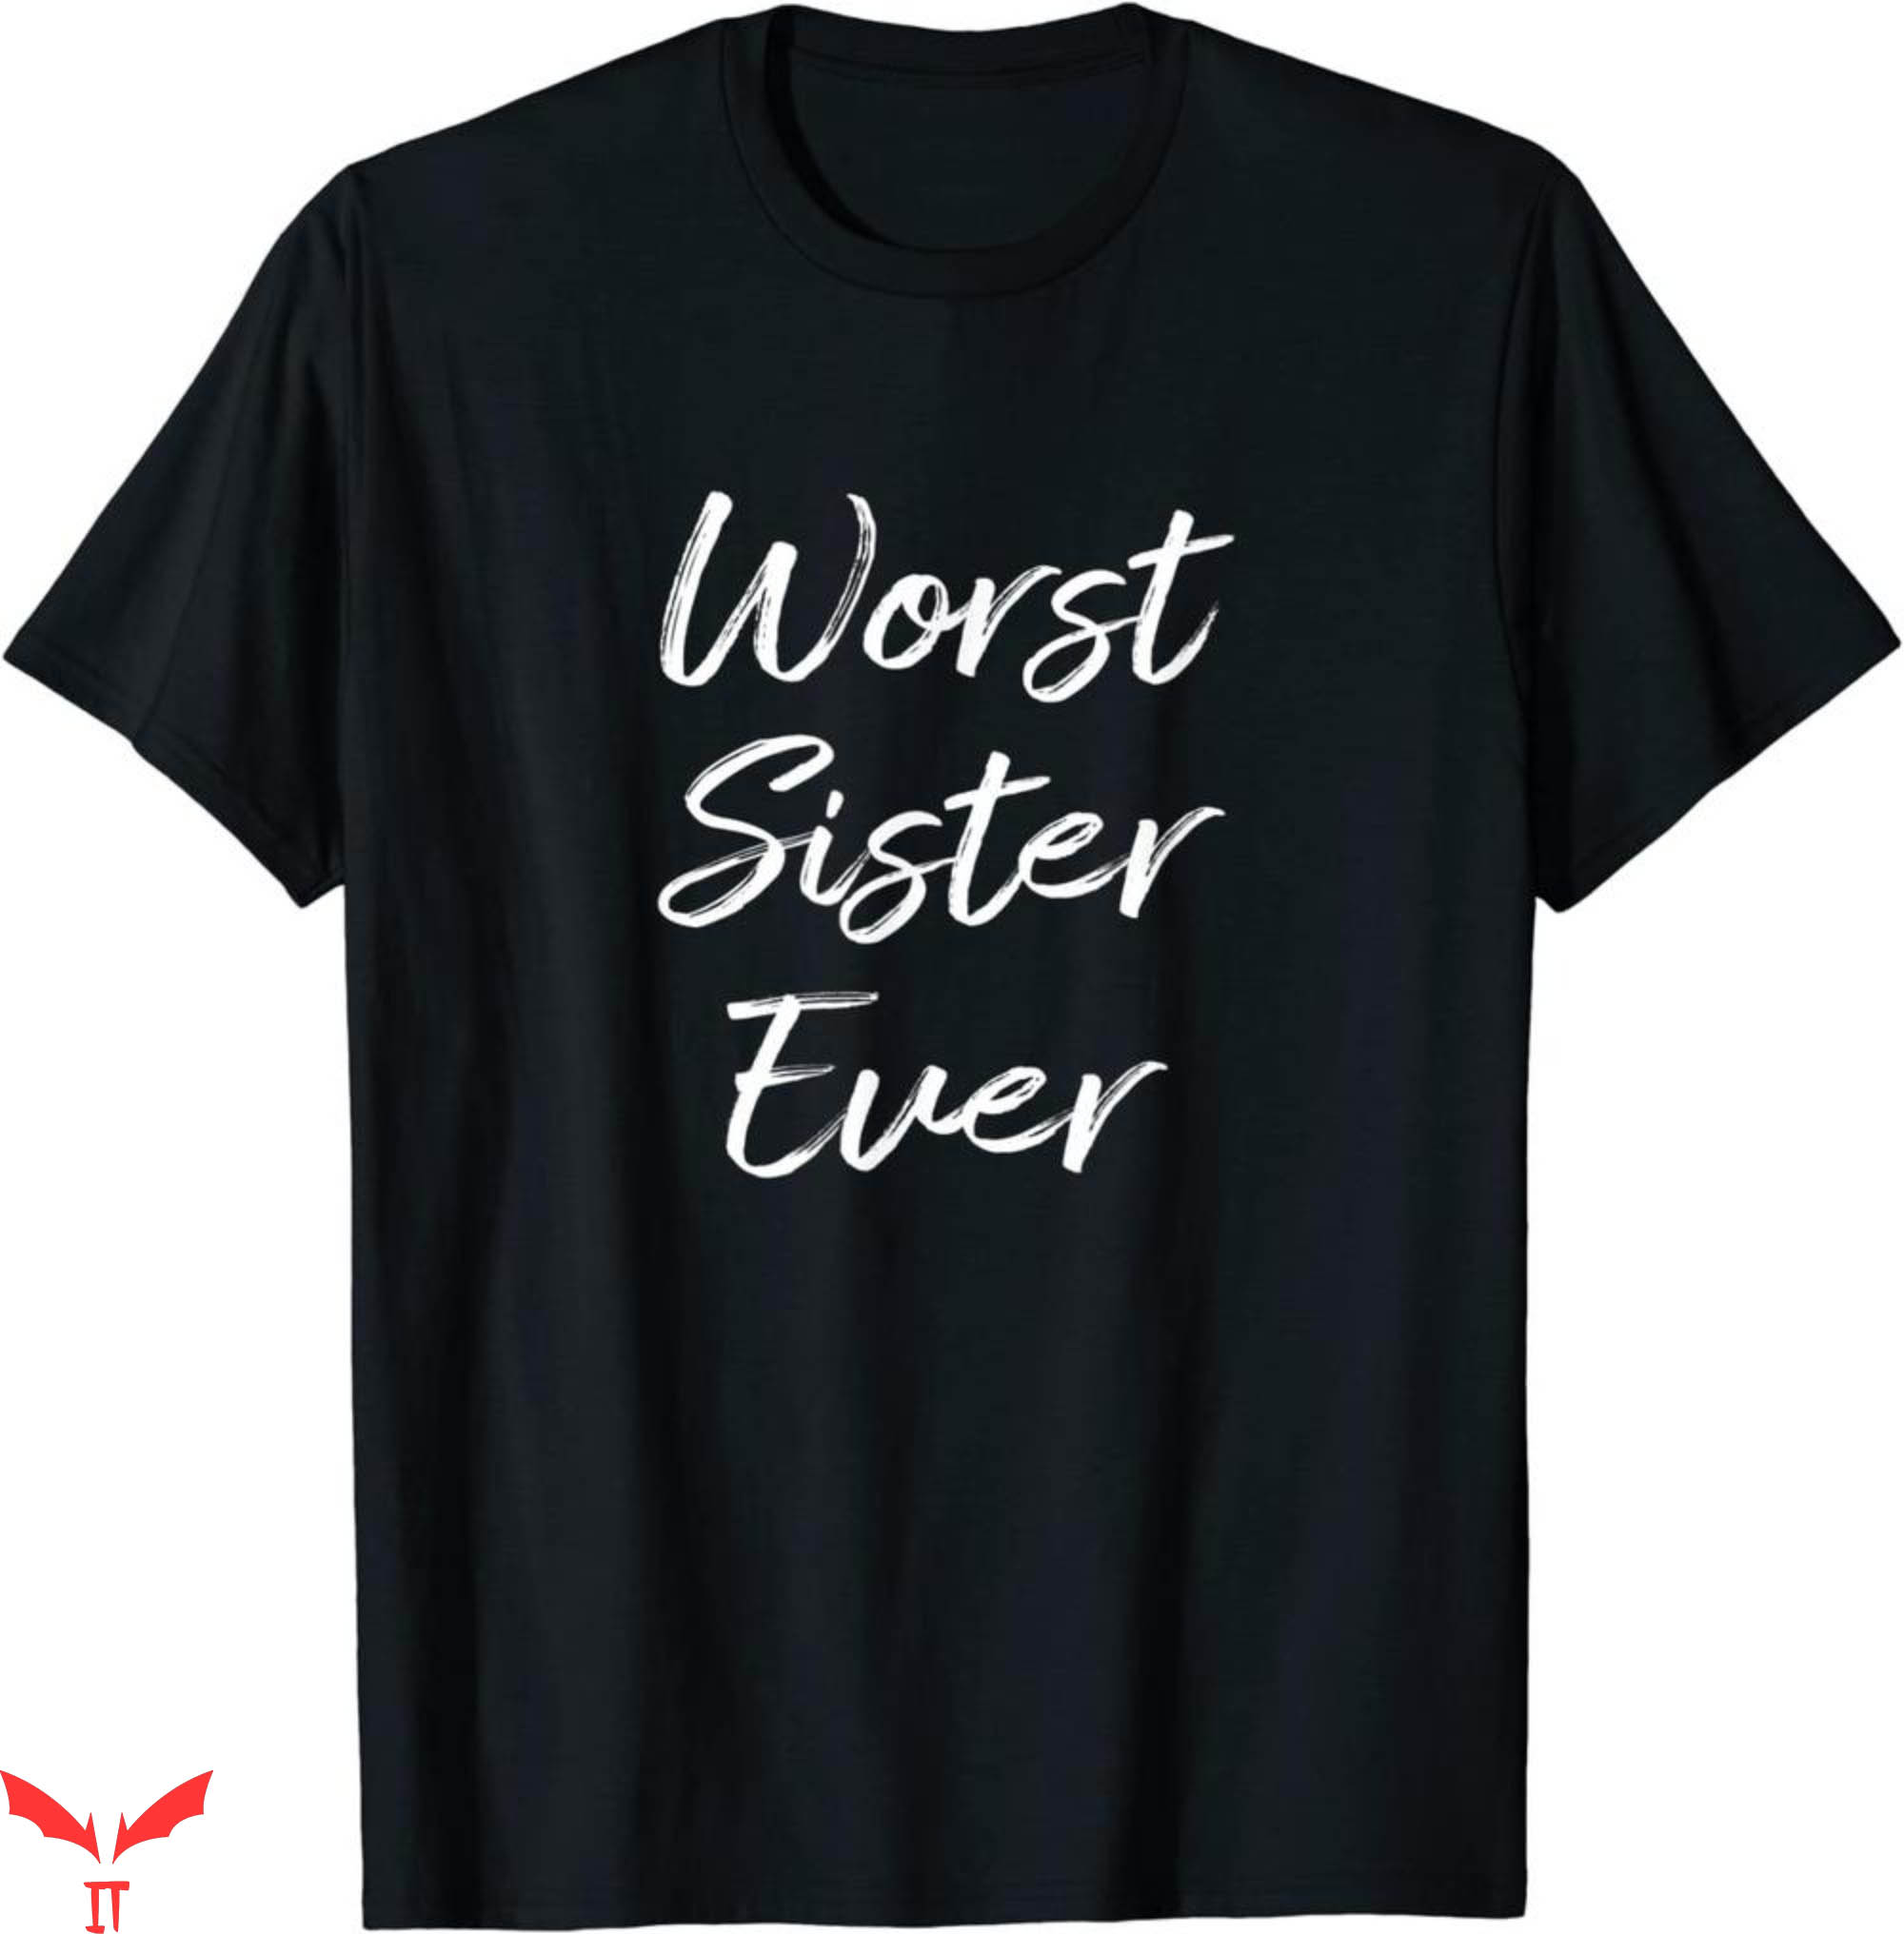 Worst T-Shirt Worst Sister Ever Funny Quote Trendy Tee Shirt